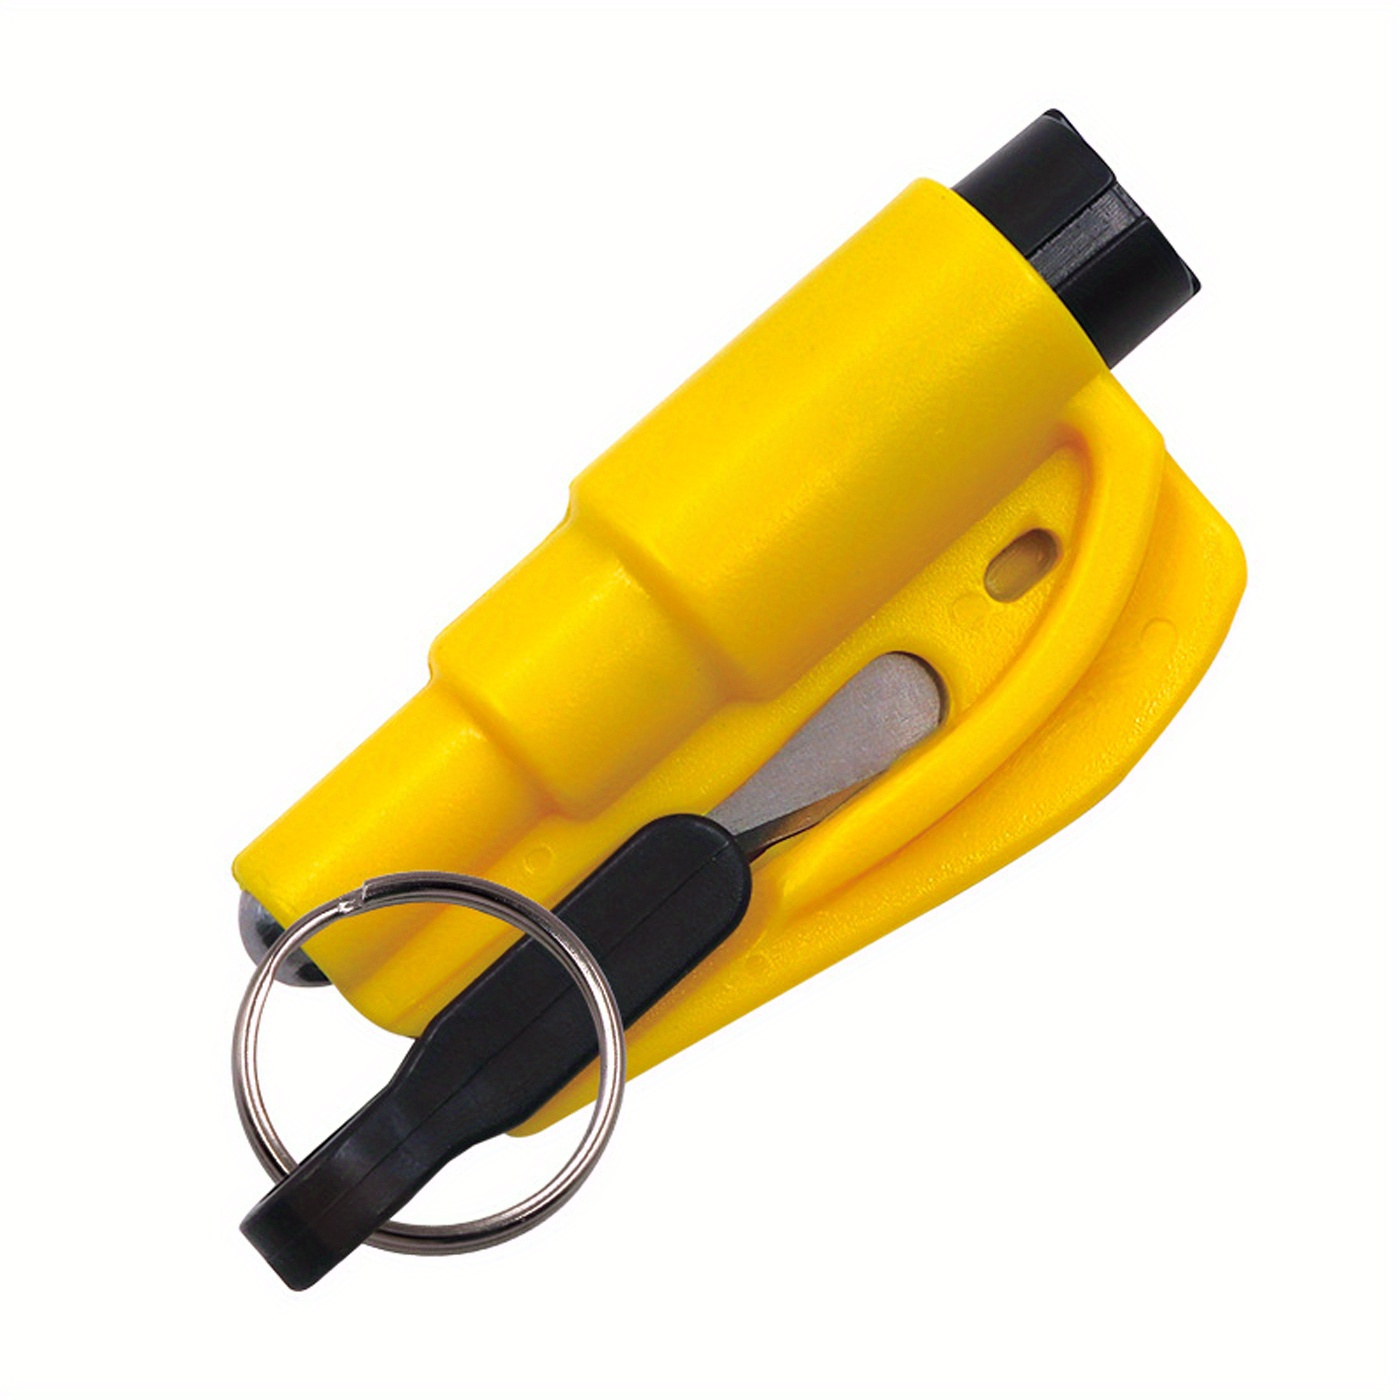 2-in-1 emergency car escape tool: safety belt cutter & metal safety hammer - save your life in an emergency! yellow 0